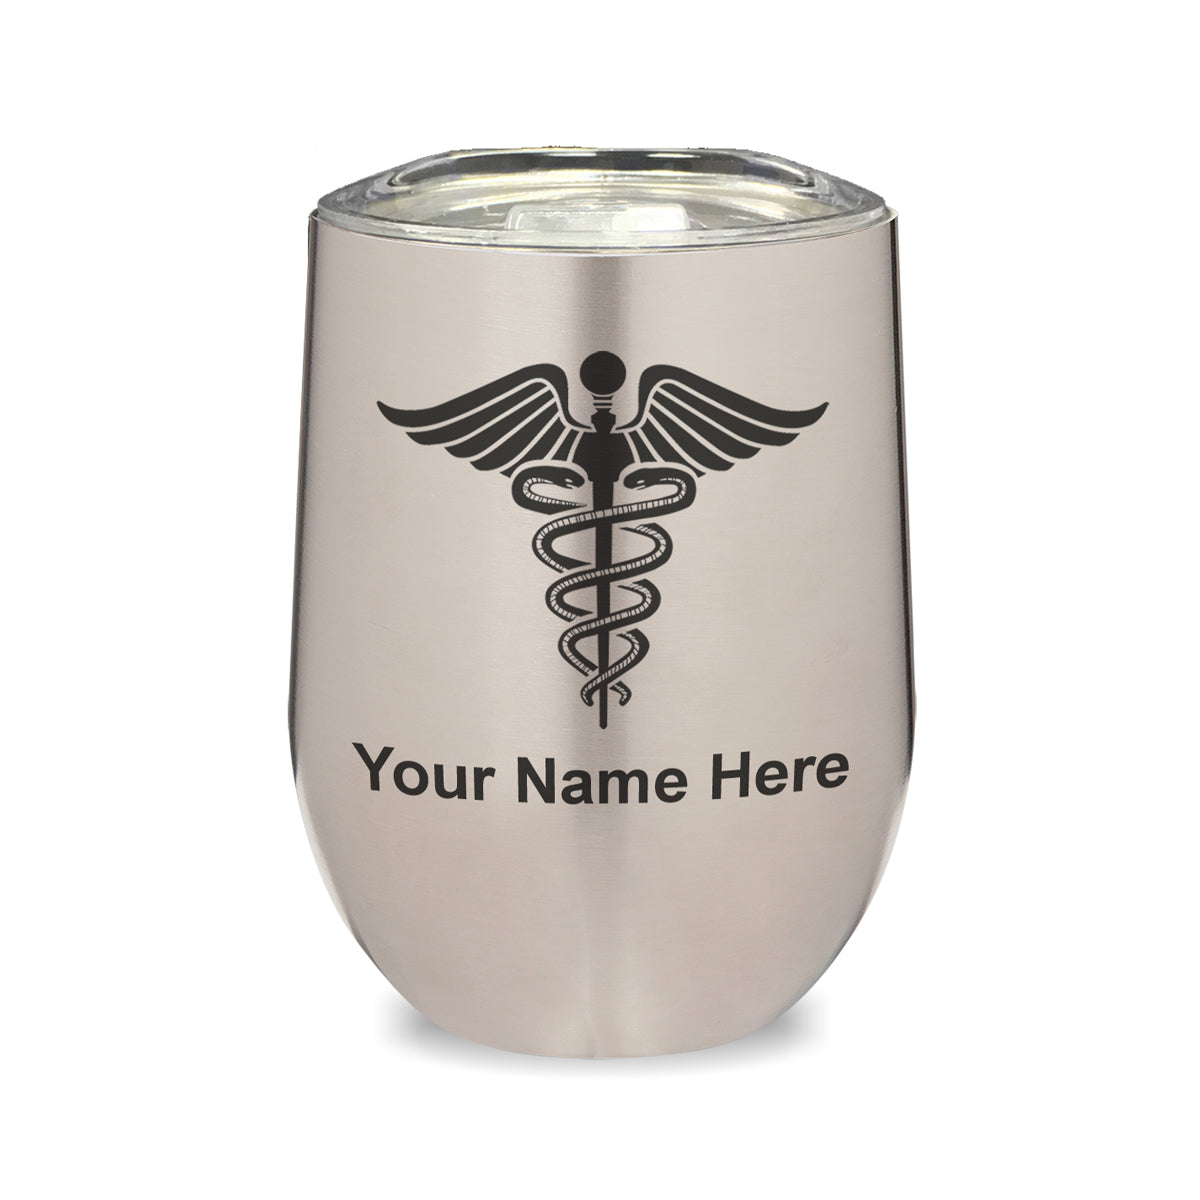 LaserGram Double Wall Stainless Steel Wine Glass, Caduceus Medical Symbol, Personalized Engraving Included